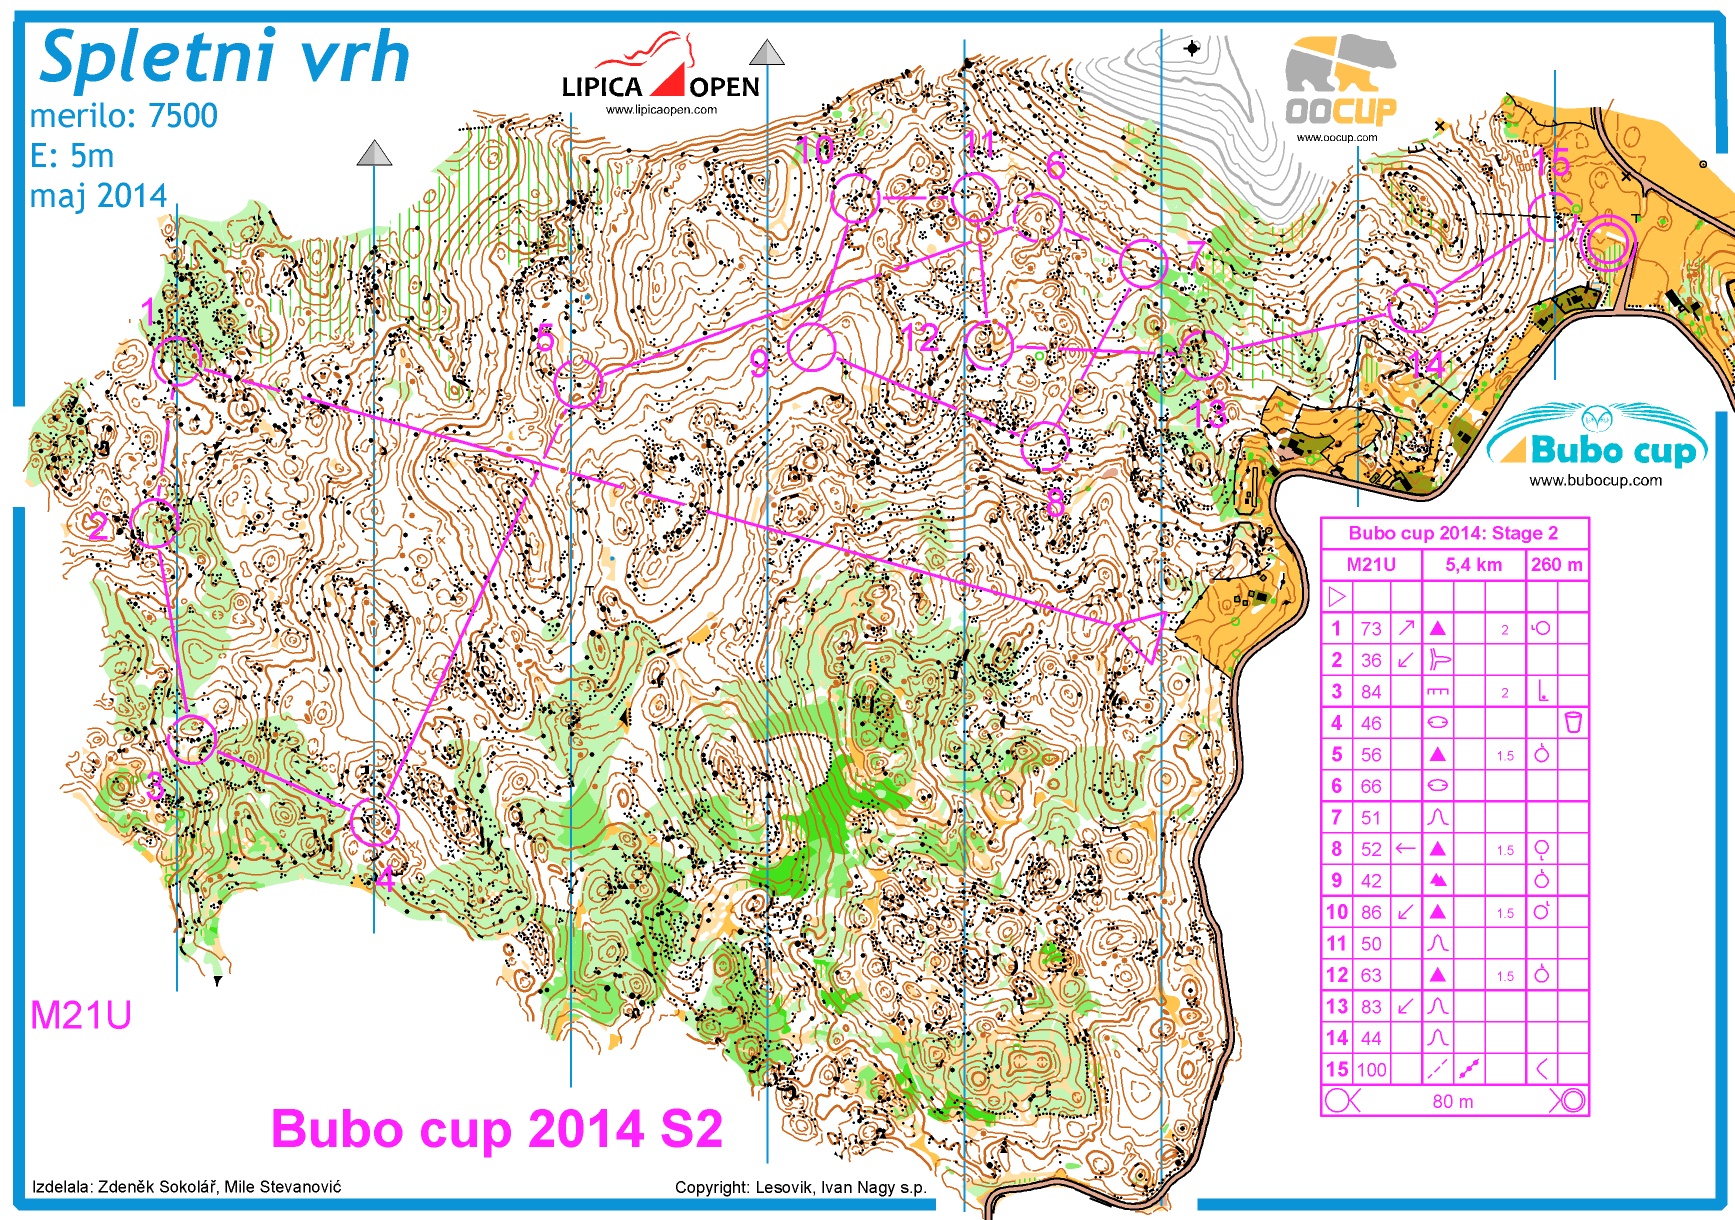 Bubo cup 2014 M21U Stage2 (25/07/2014)